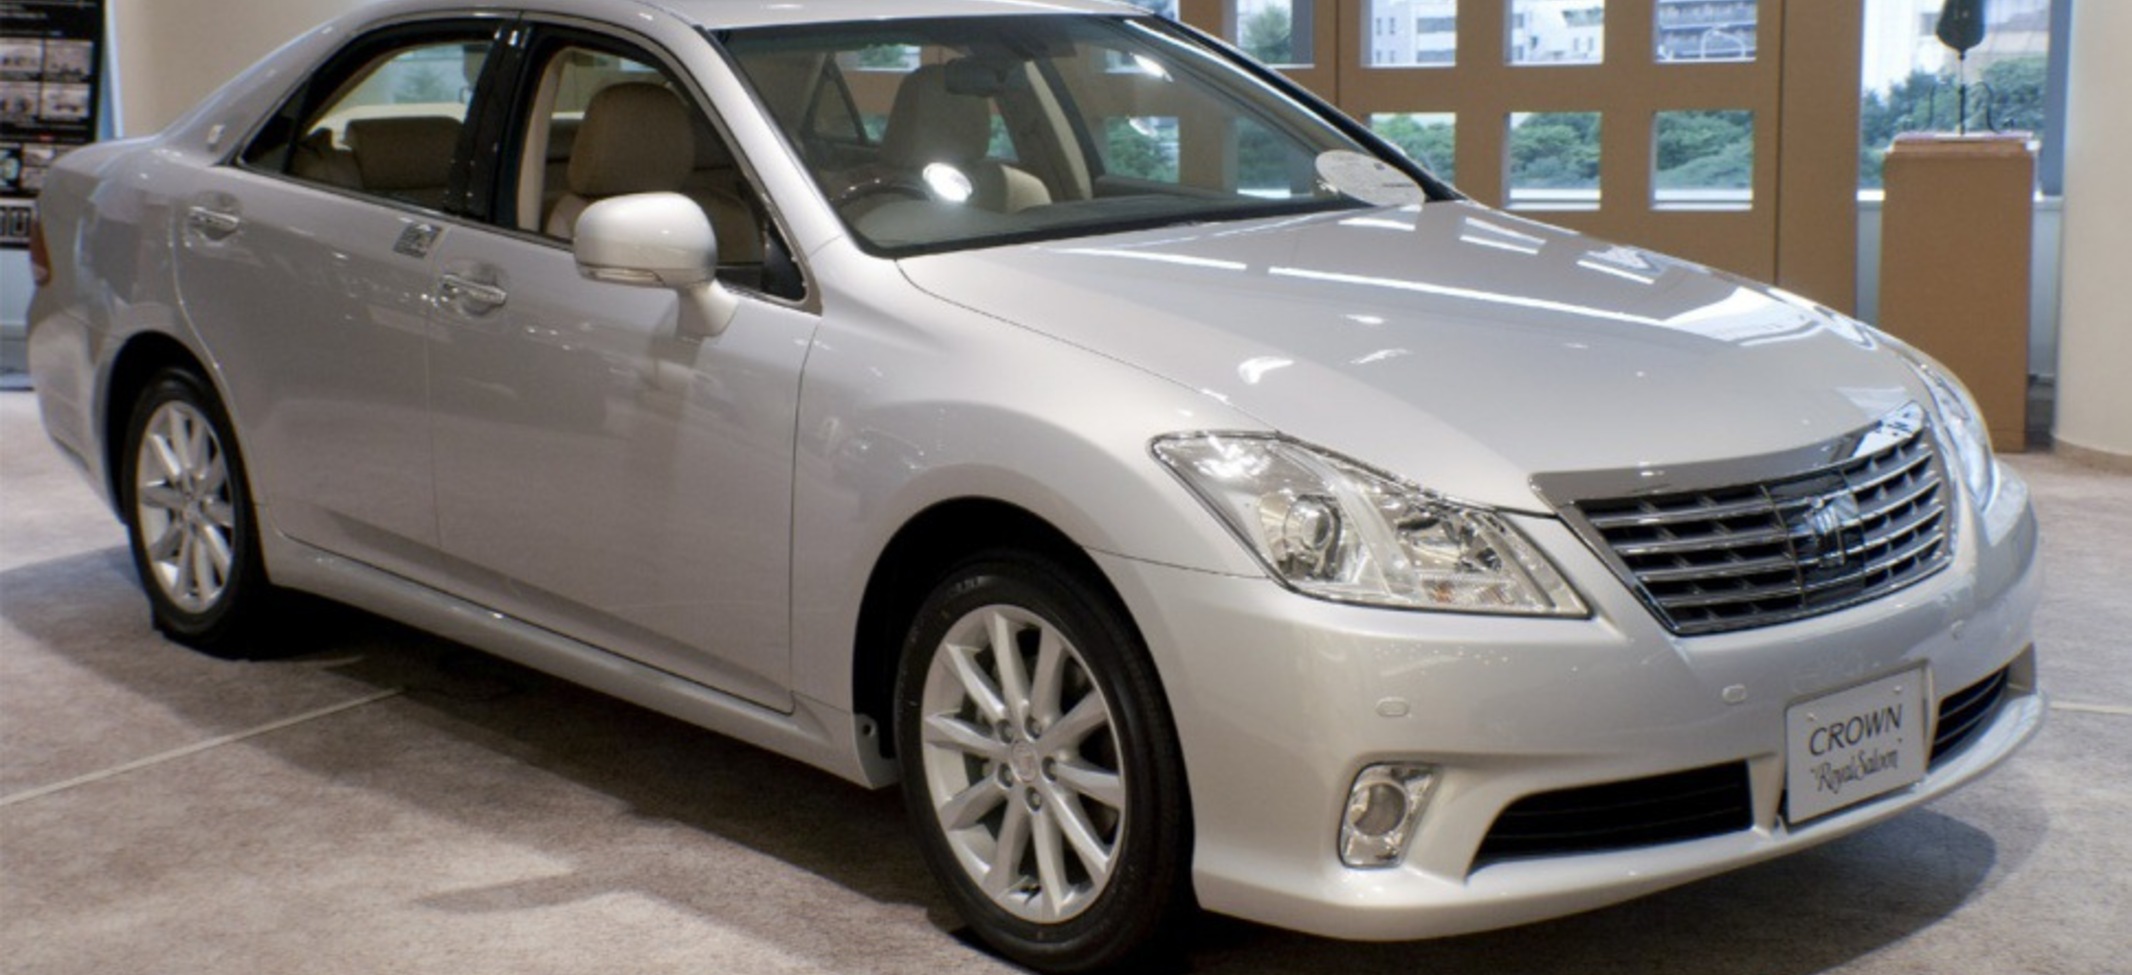 Toyota Crown Royal XIII (S200, facelift 2010) 2.5 i-Four V6 24V (203 Hp) 4WD Automatic 2010, 2011, 2012 